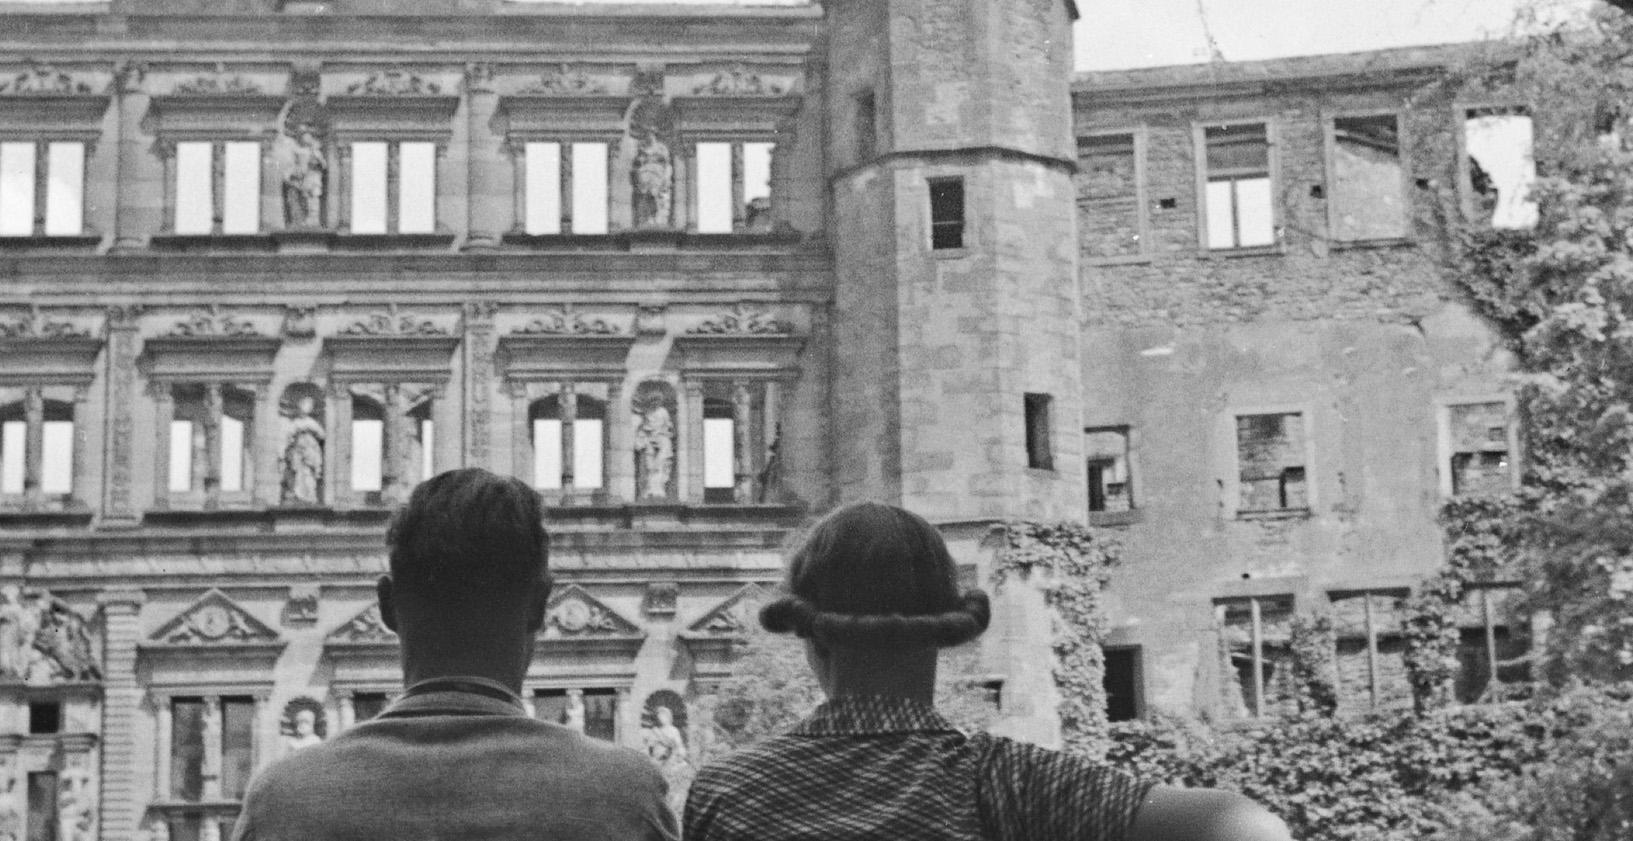 Couple on bench view to Heidelberg castle, Germany 1936, Printed Later  - Photograph by Karl Heinrich Lämmel